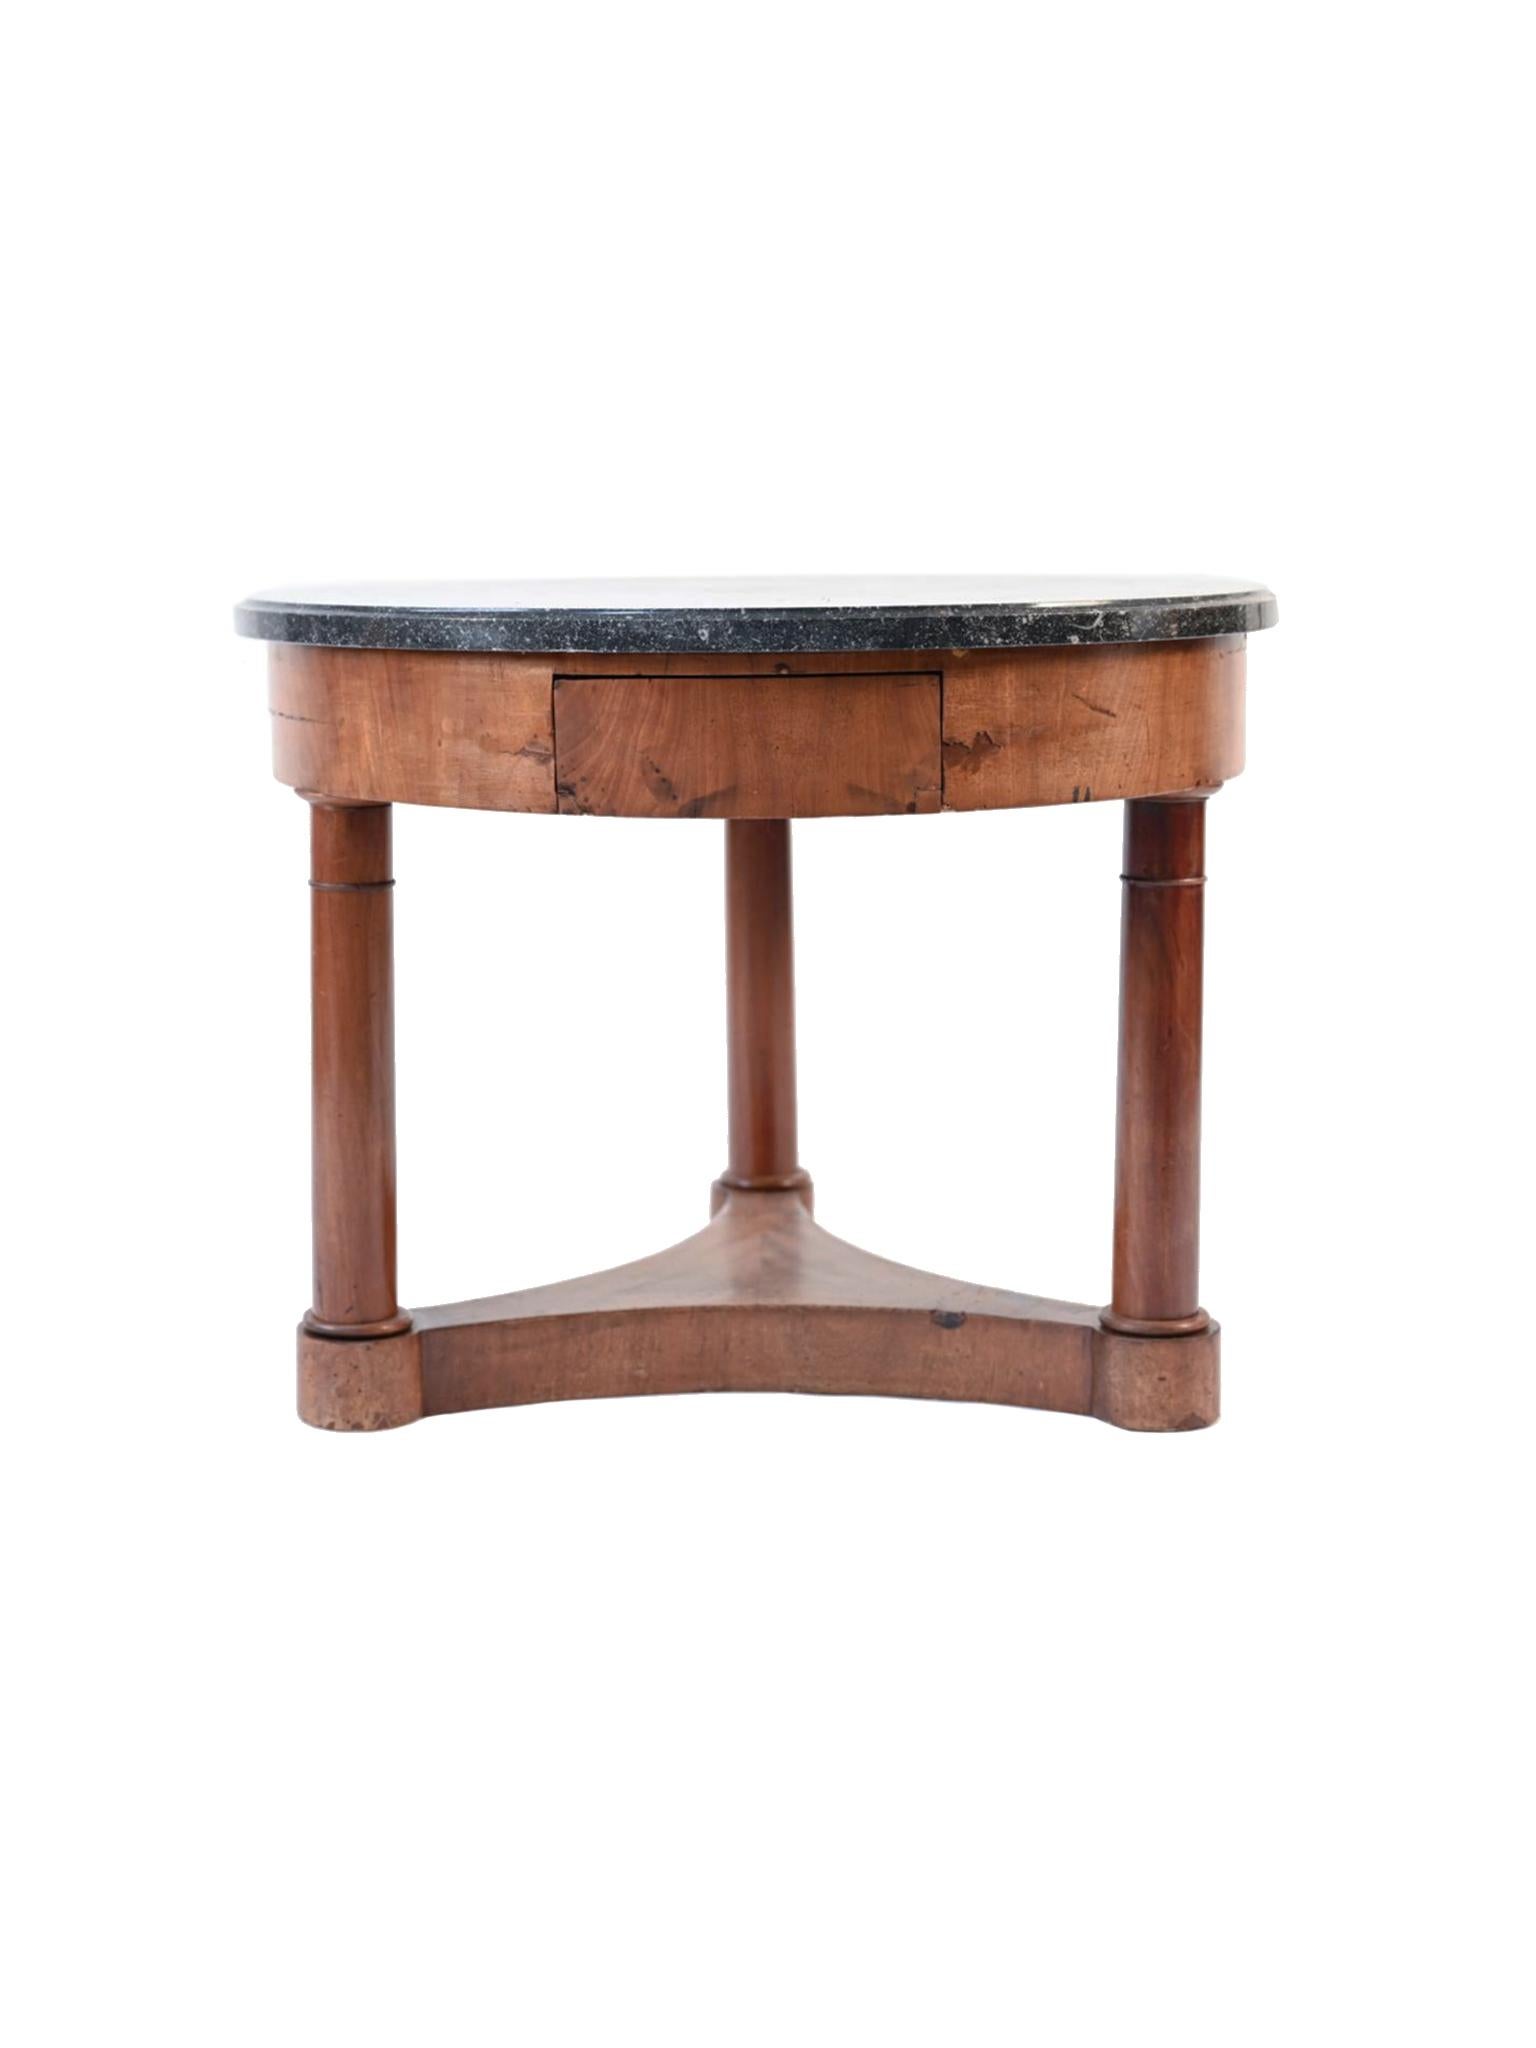 French 19th Century Neoclassical Mahogany & Marble Side Table